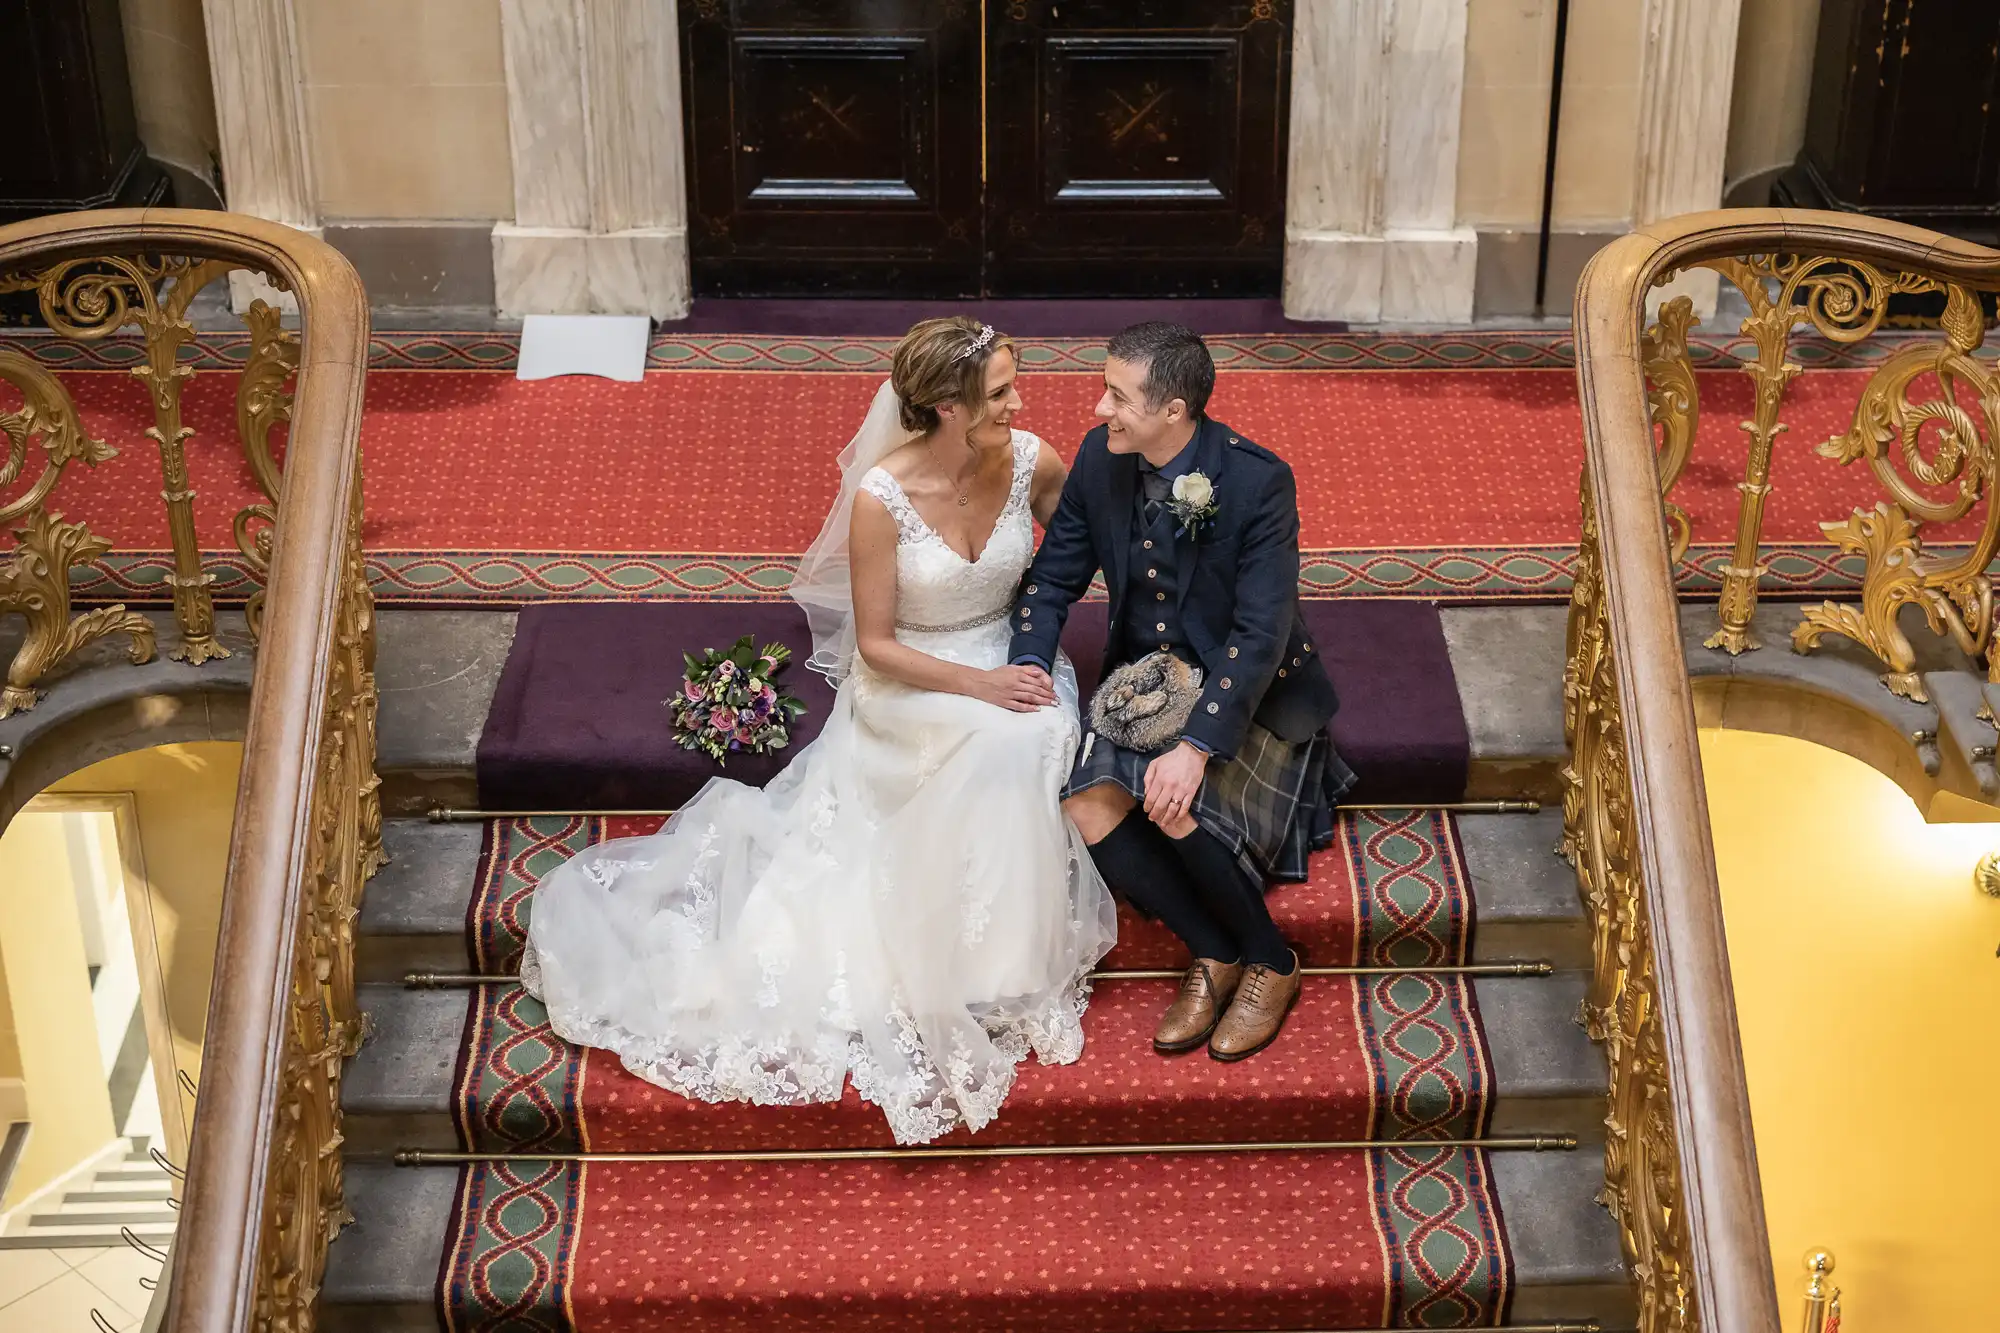 Bride and groom sitting on ornate stairs. Bride wears a white gown, groom wears a kilt. Bouquets of flowers are placed beside them. Jenna is leaning into Tom in this moment of shared happiness.